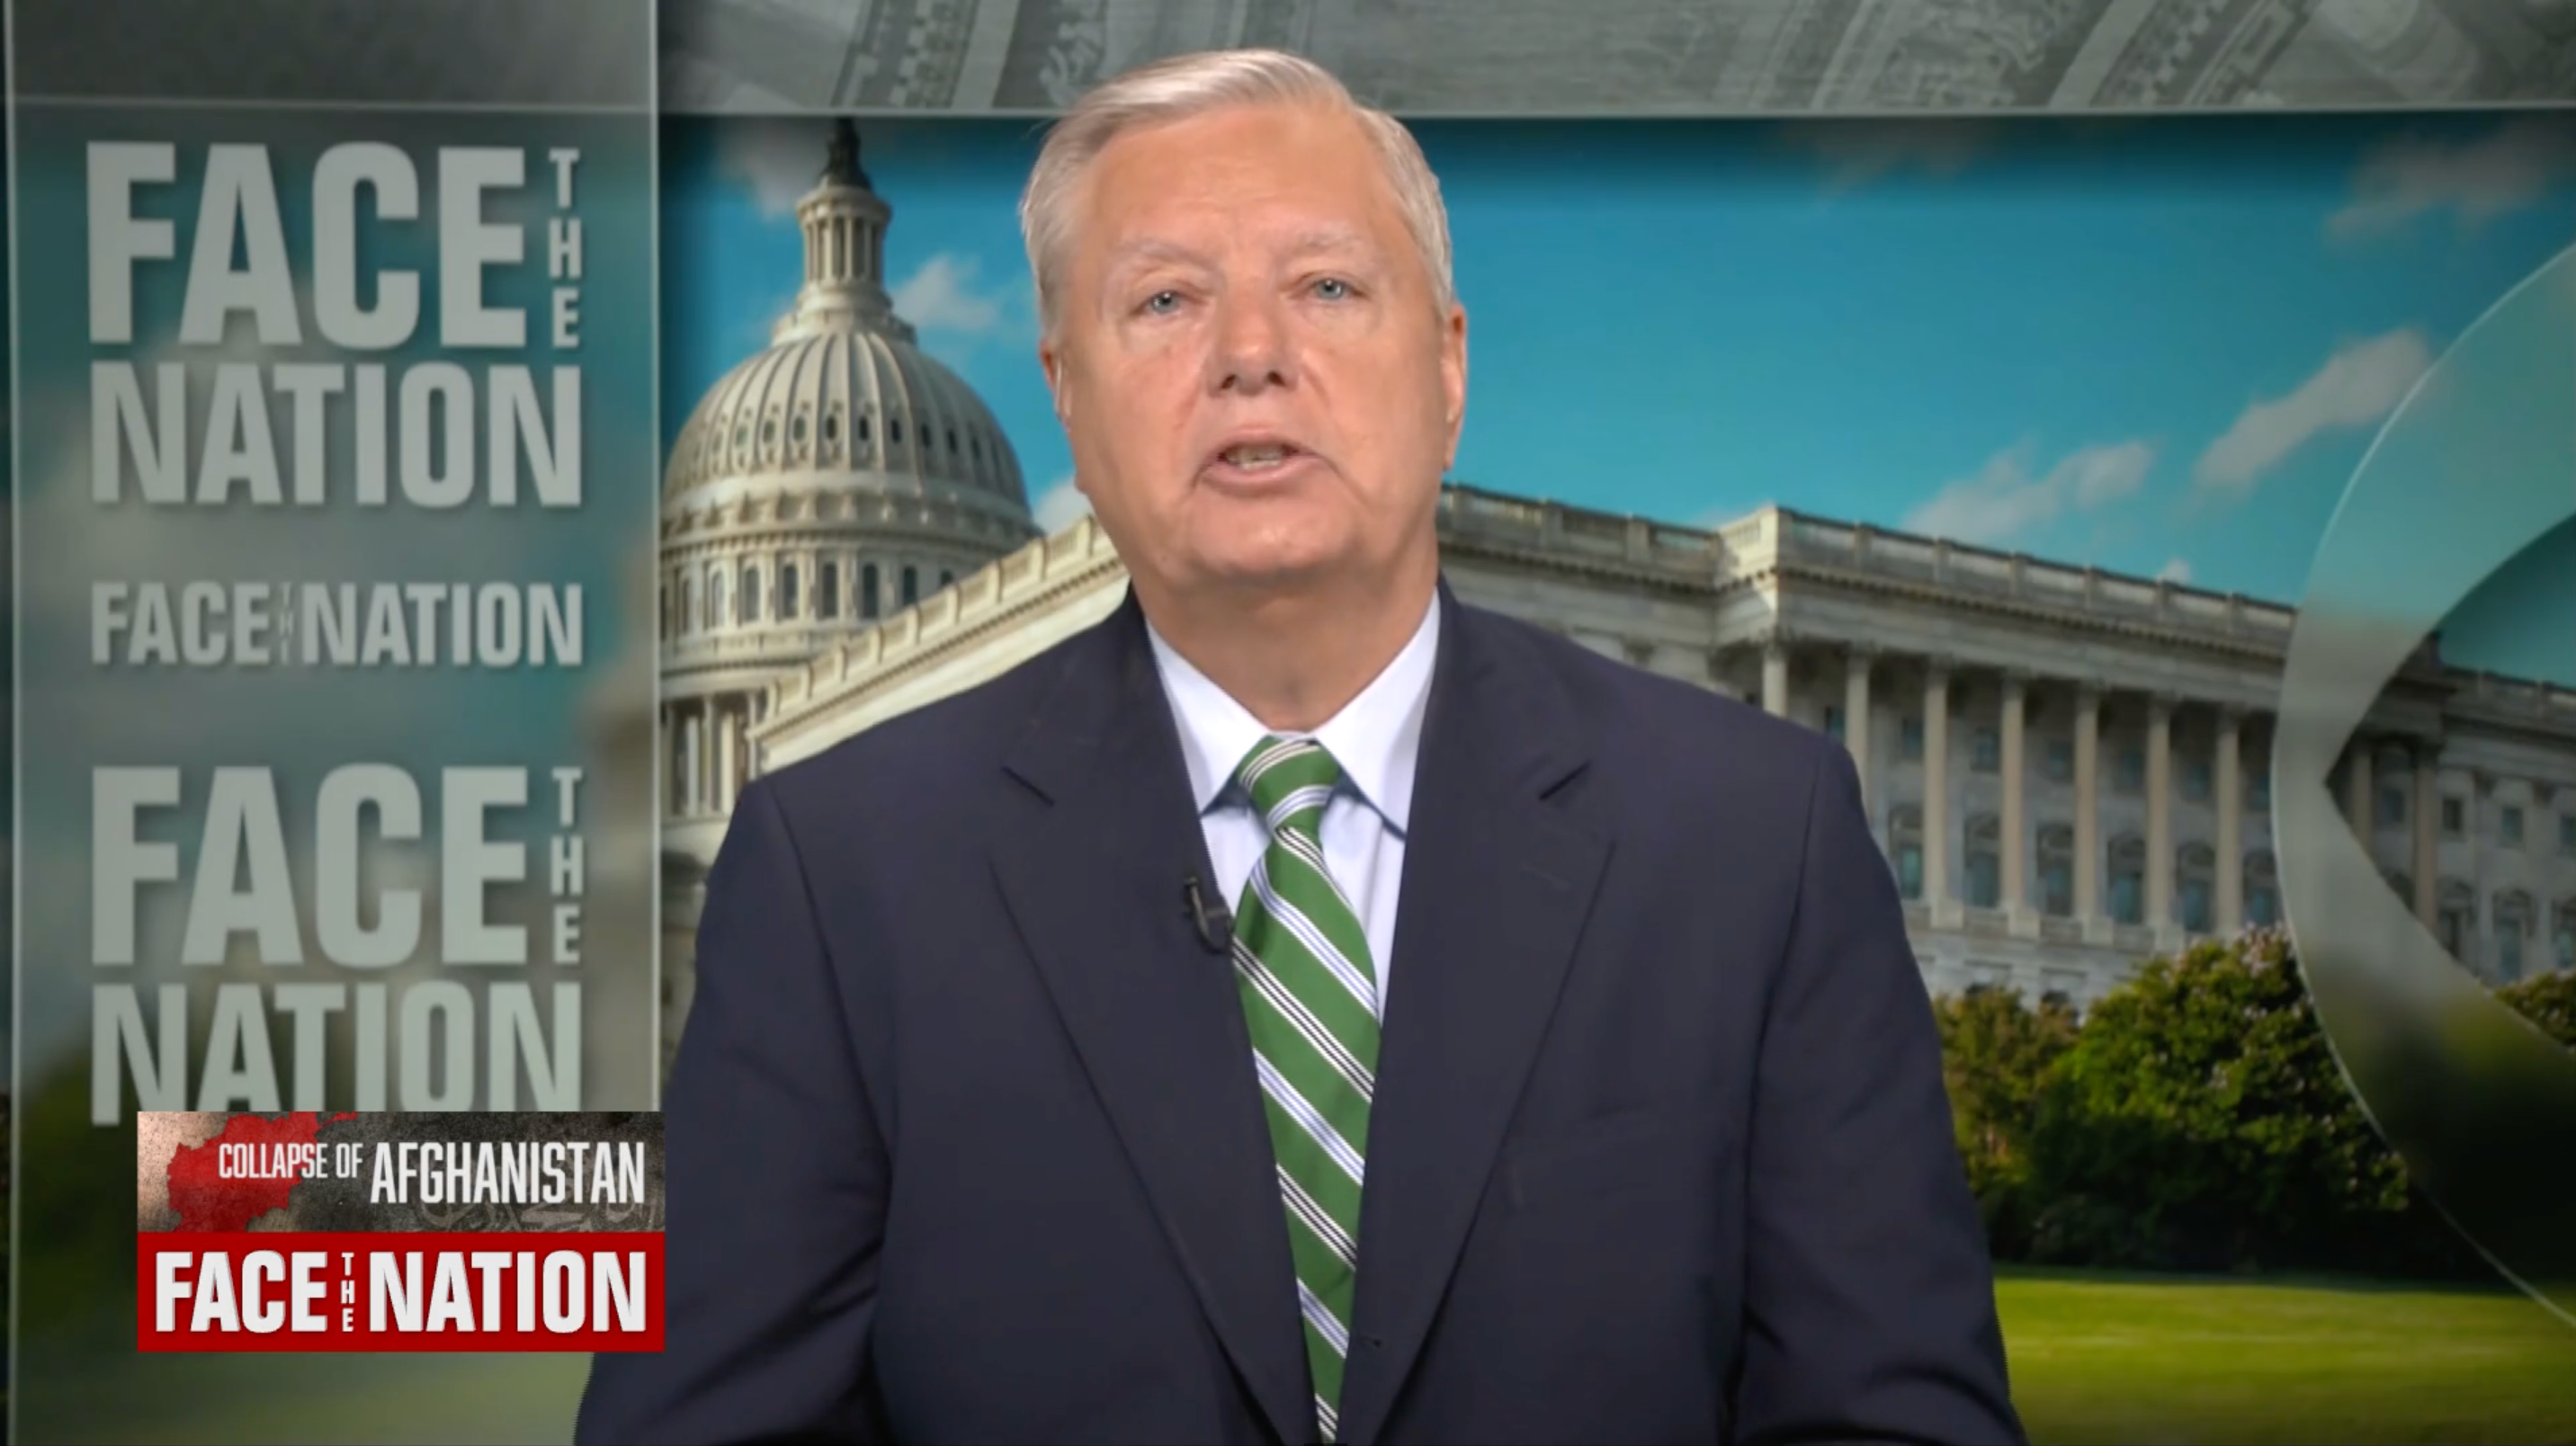 File image: Lindsey Graham has been repeatedly pushing for restrictions on abortion